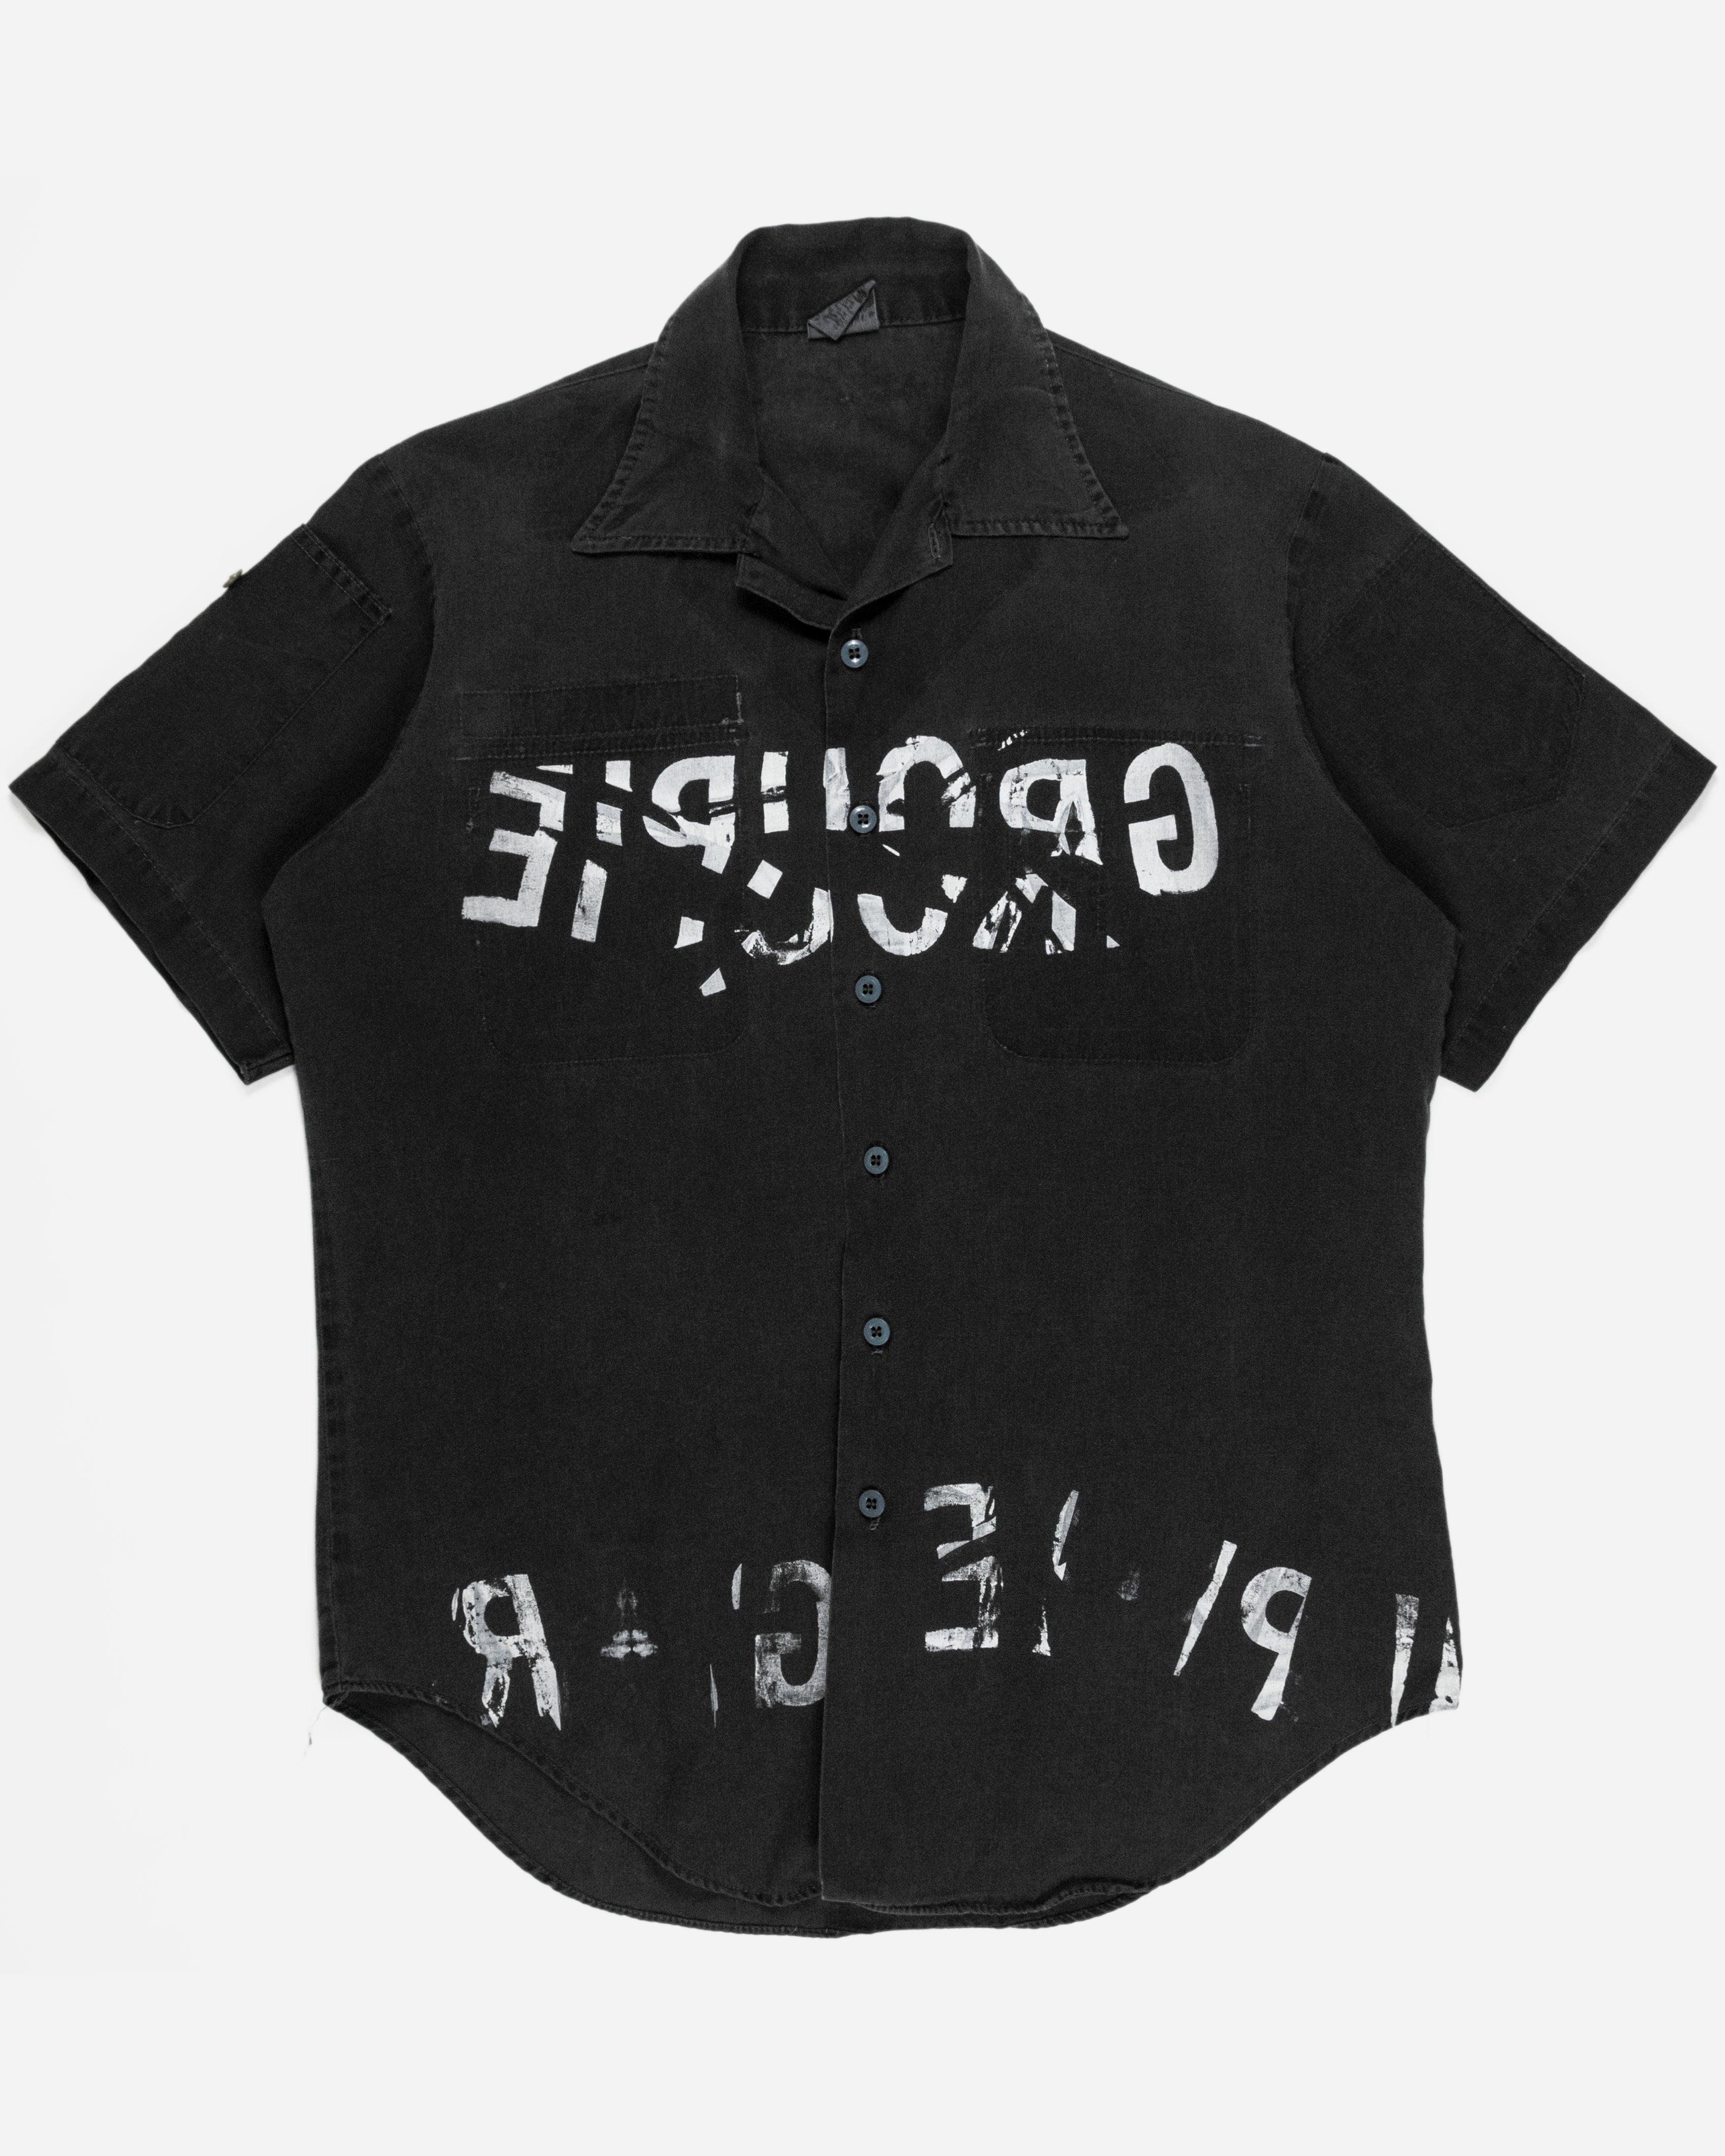 Undercover “One Off” Groupie Work Shirt - SS99 “Relief” - SILVER